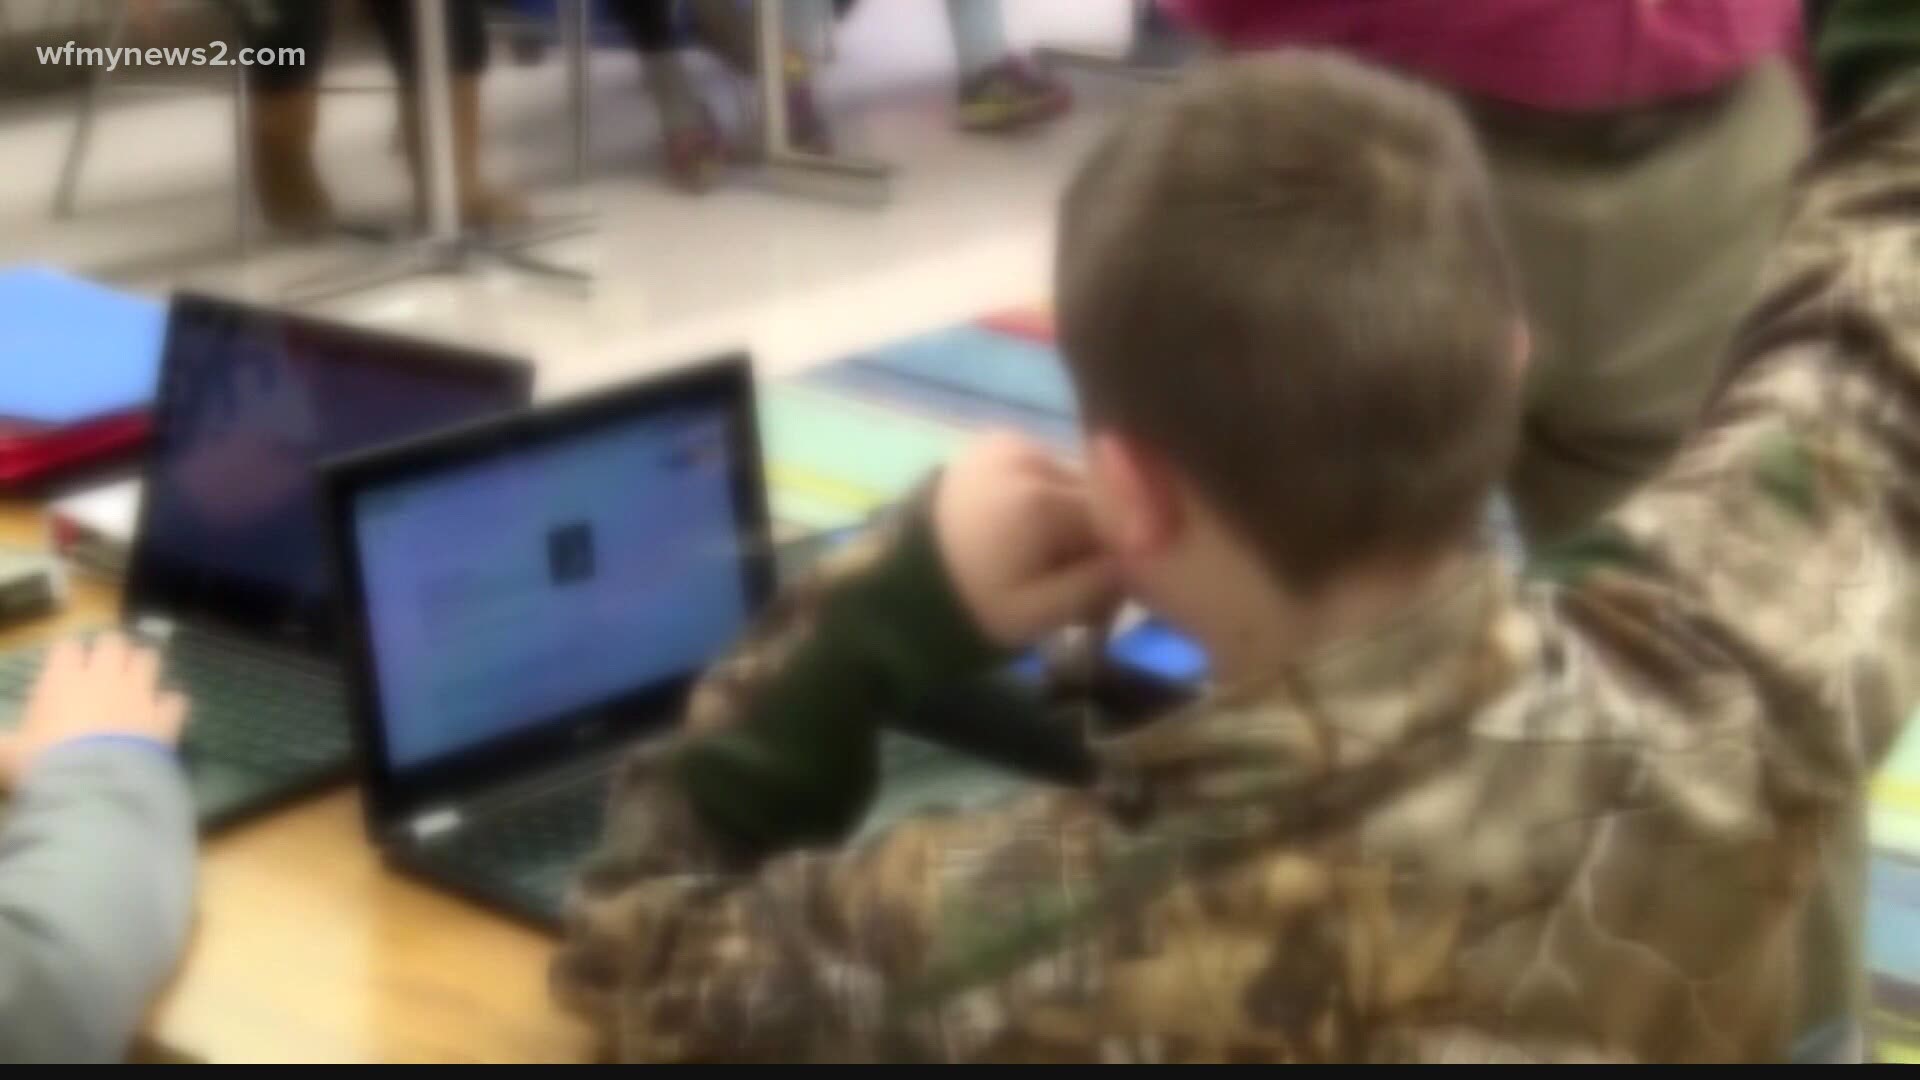 The Governor made the announcement as thousands of Triad families continue to deal with remote learning.